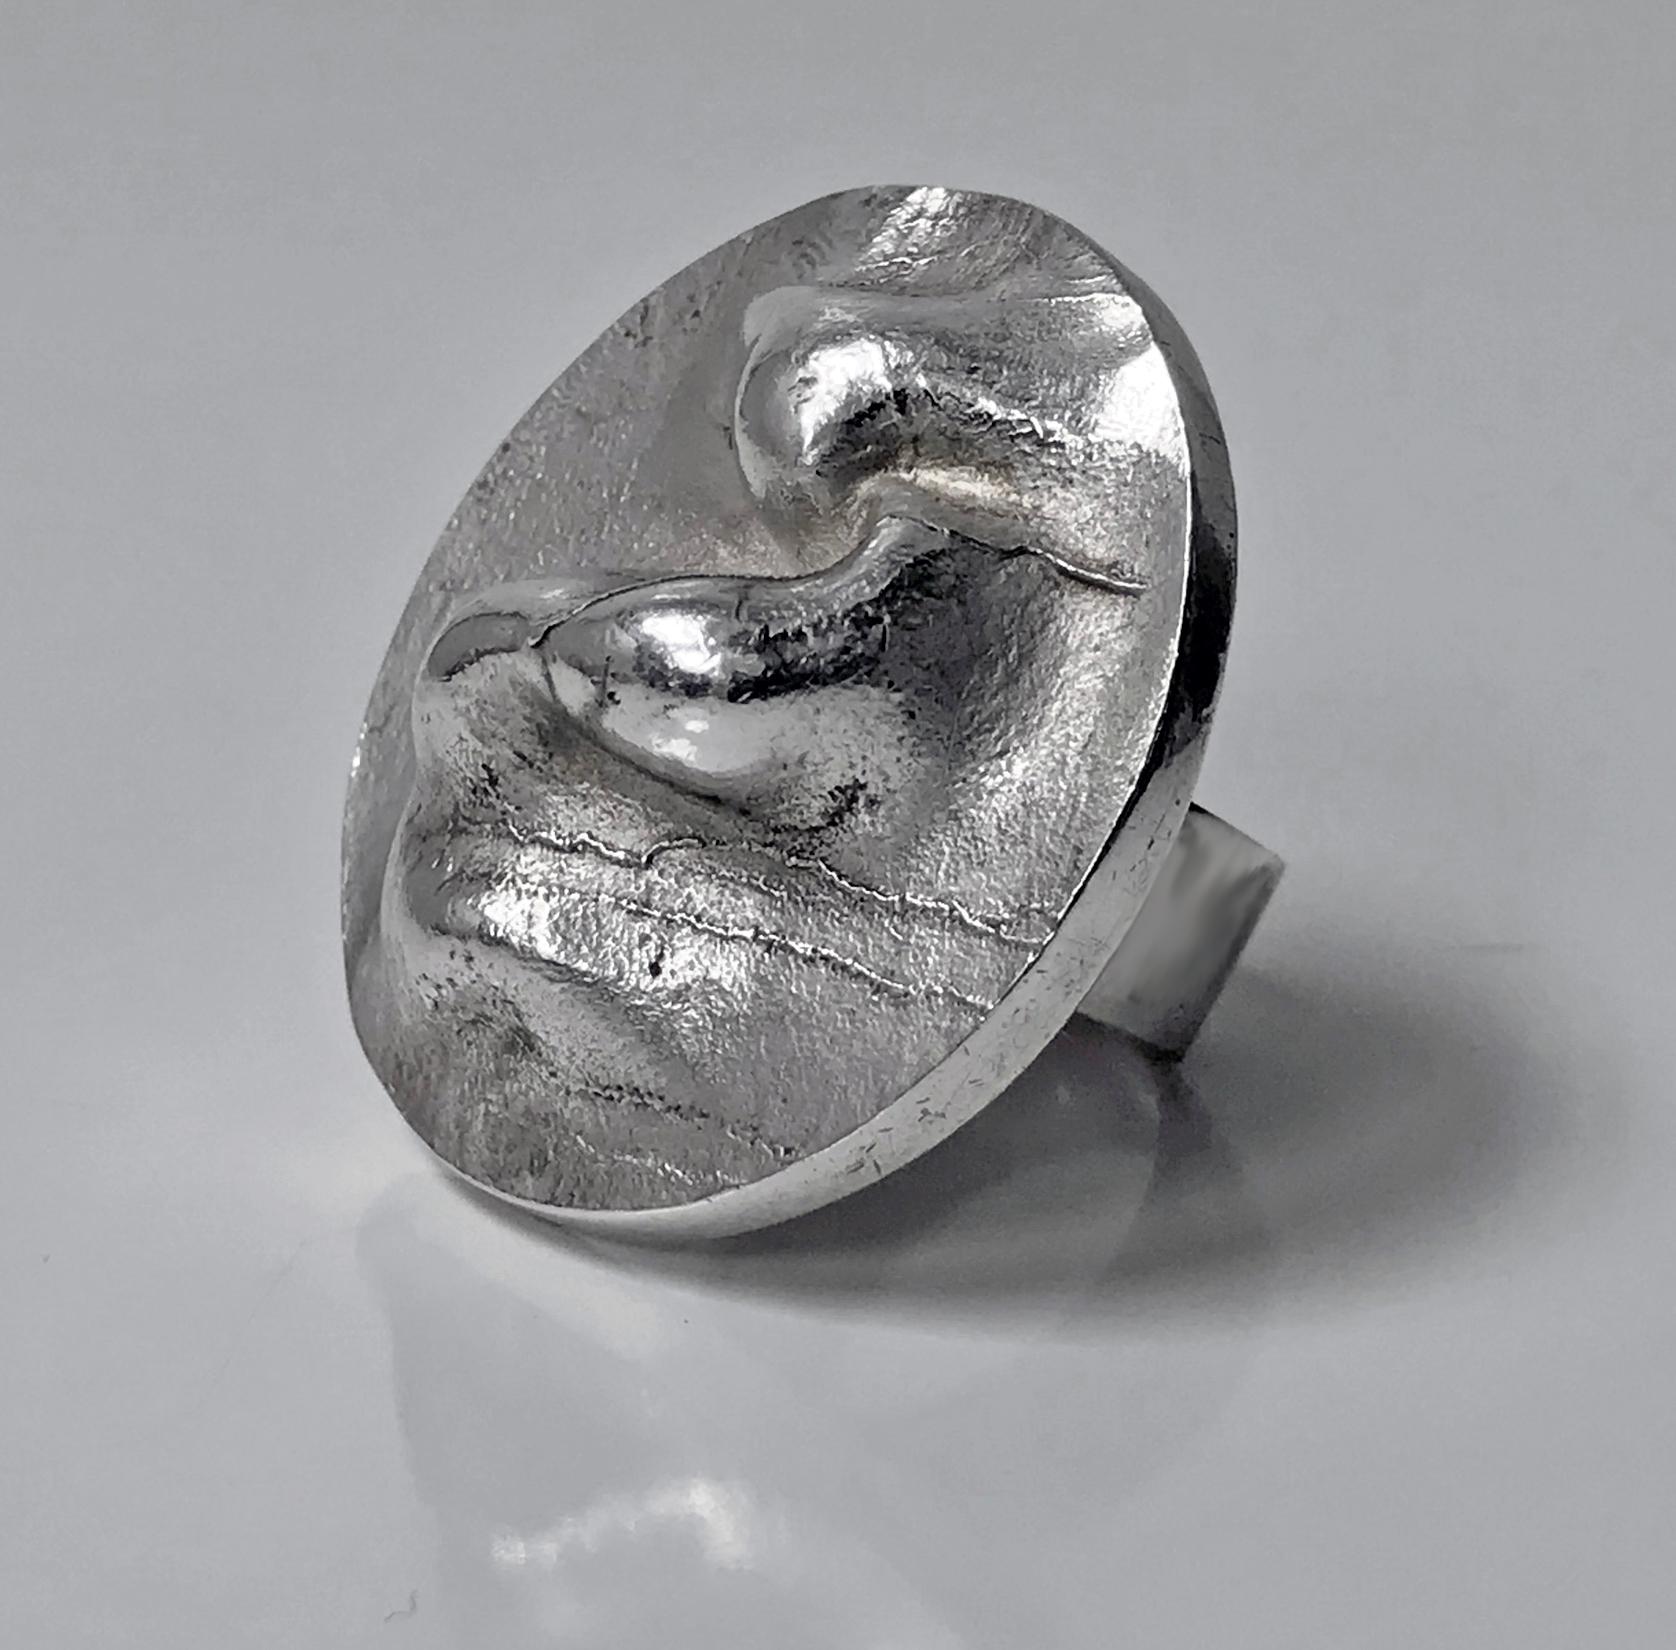 Rare Modernist Lapponia Bjorn Weckstrom Sterling Ring, 1971. The Ring depicting a crater as part of the Space. Diameter of Ring: 1.5 inches. Full Lapponia marks and date letter for 1971. Ring Size: 6.5. Total Item Weight: 22 grams.